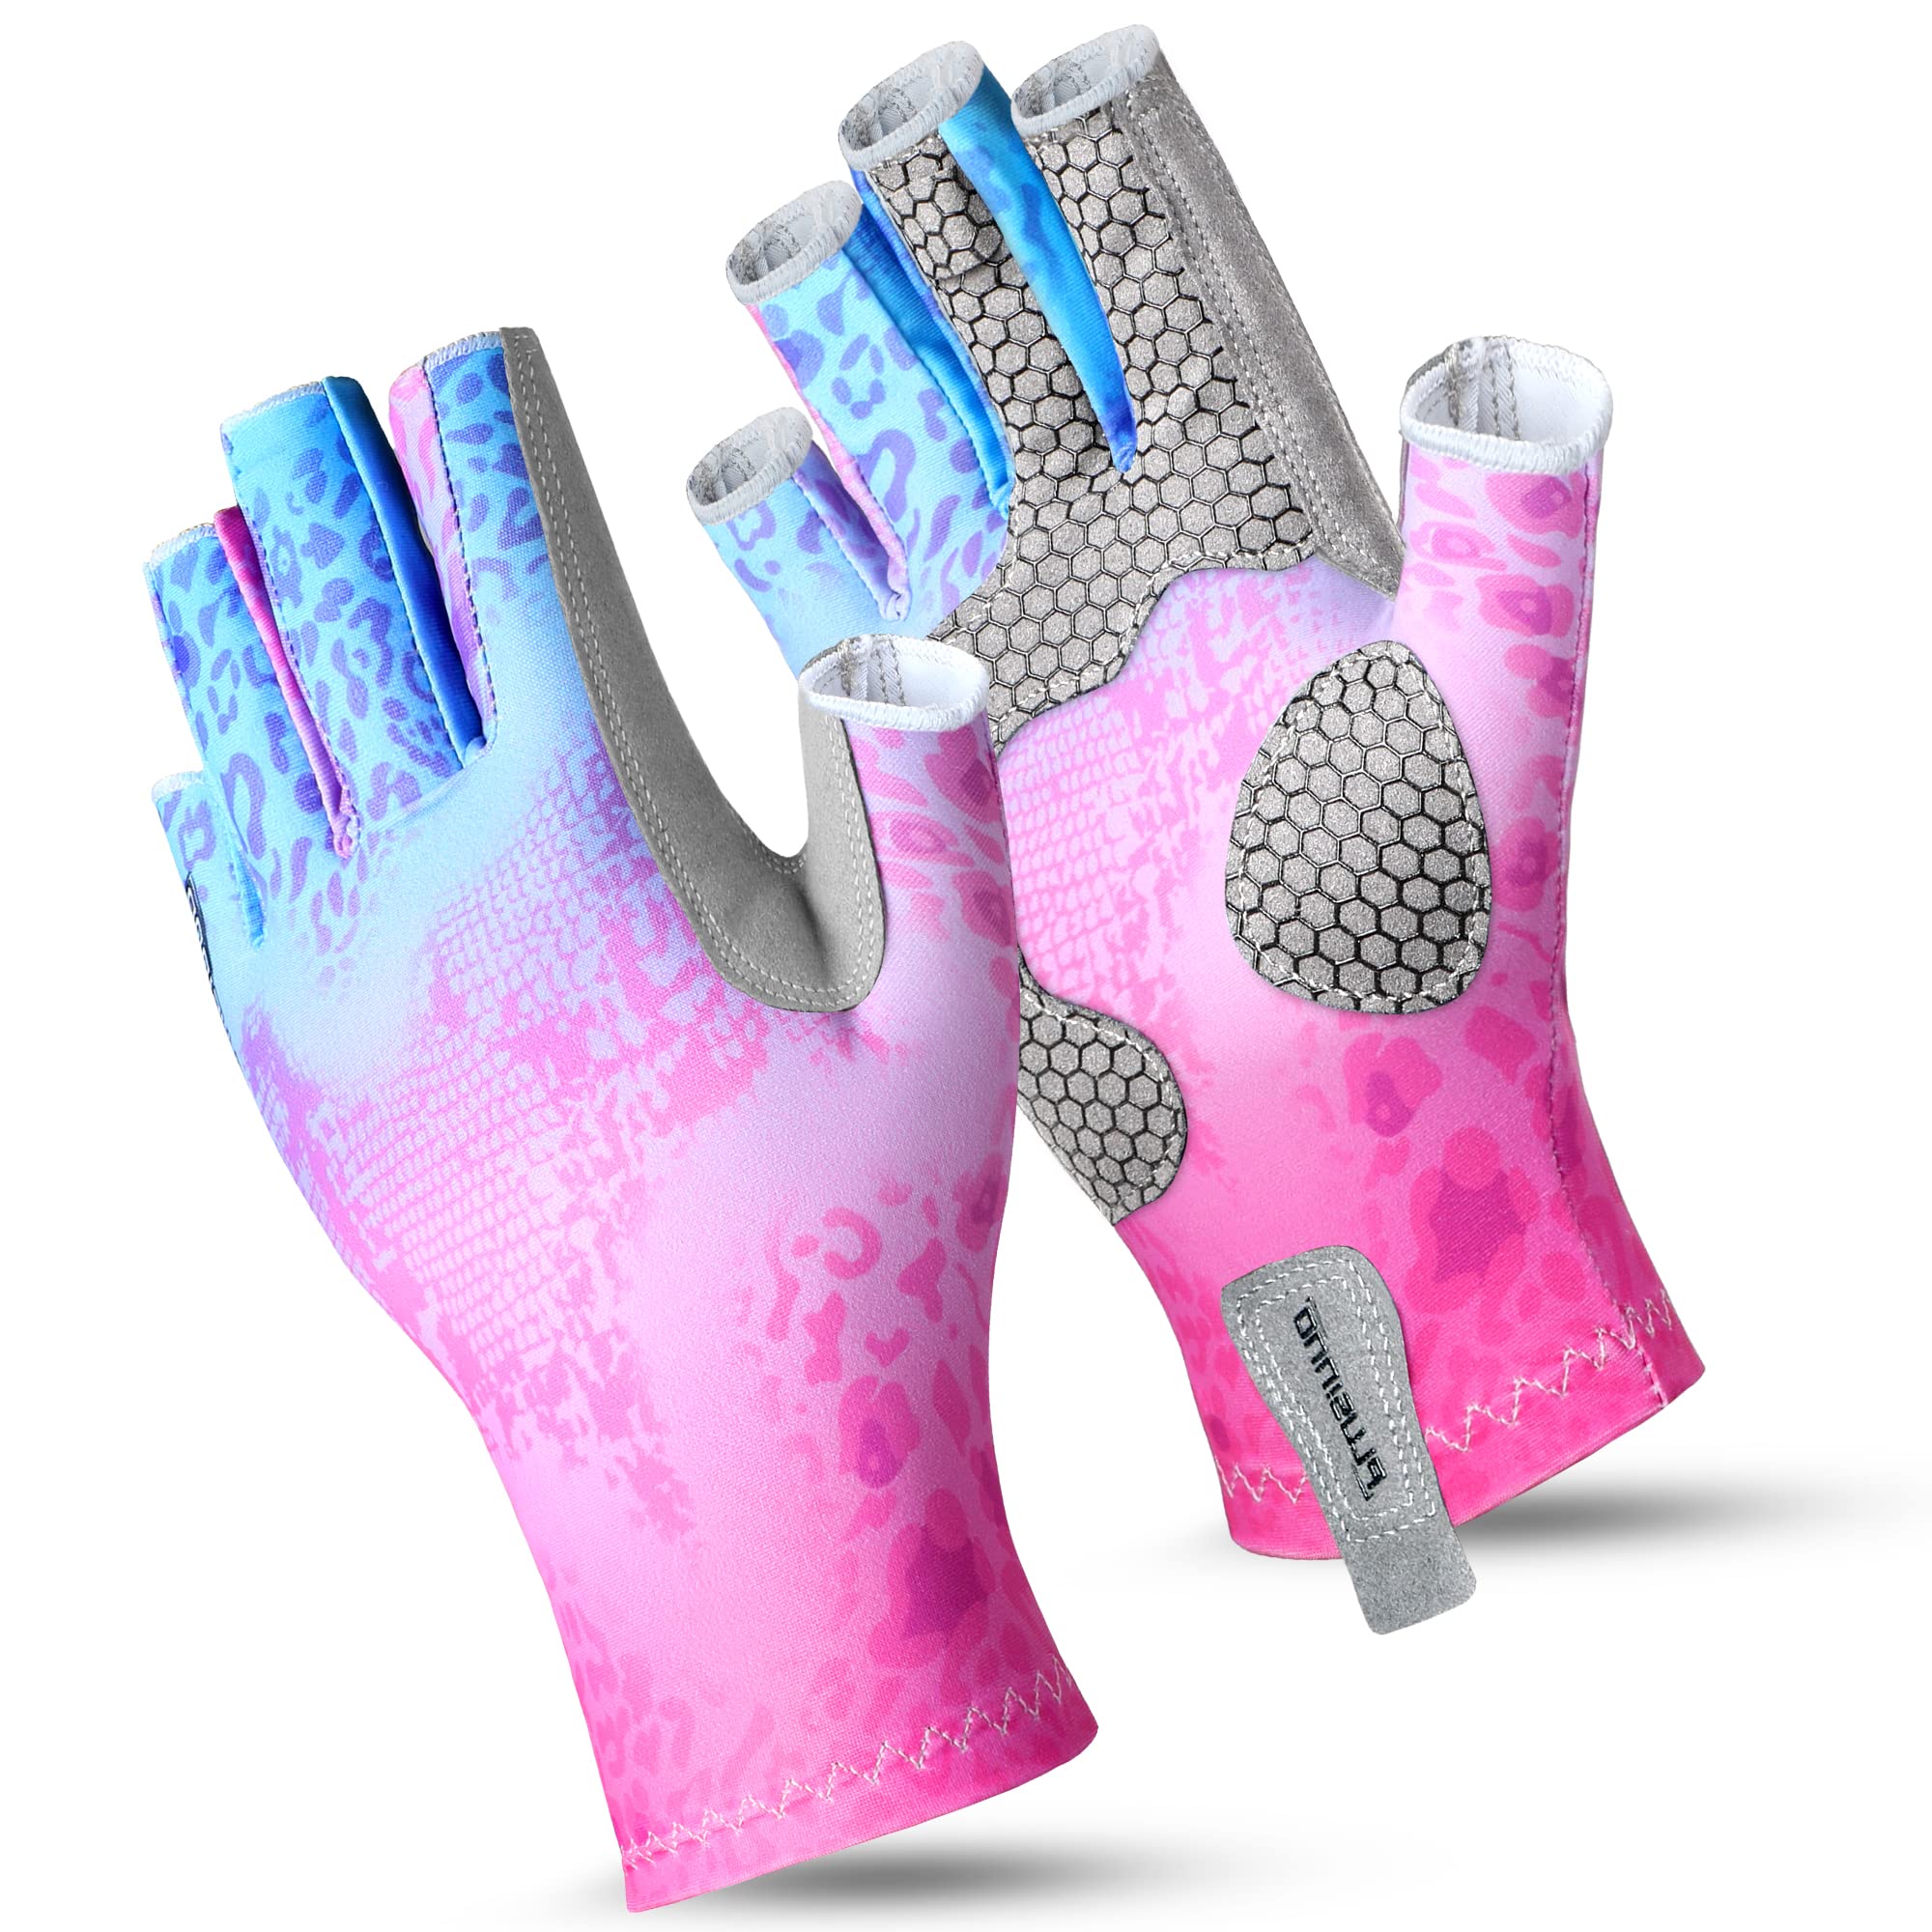 Ultraviolet Protective Gloves Sunscreen Gloves For Men And Women